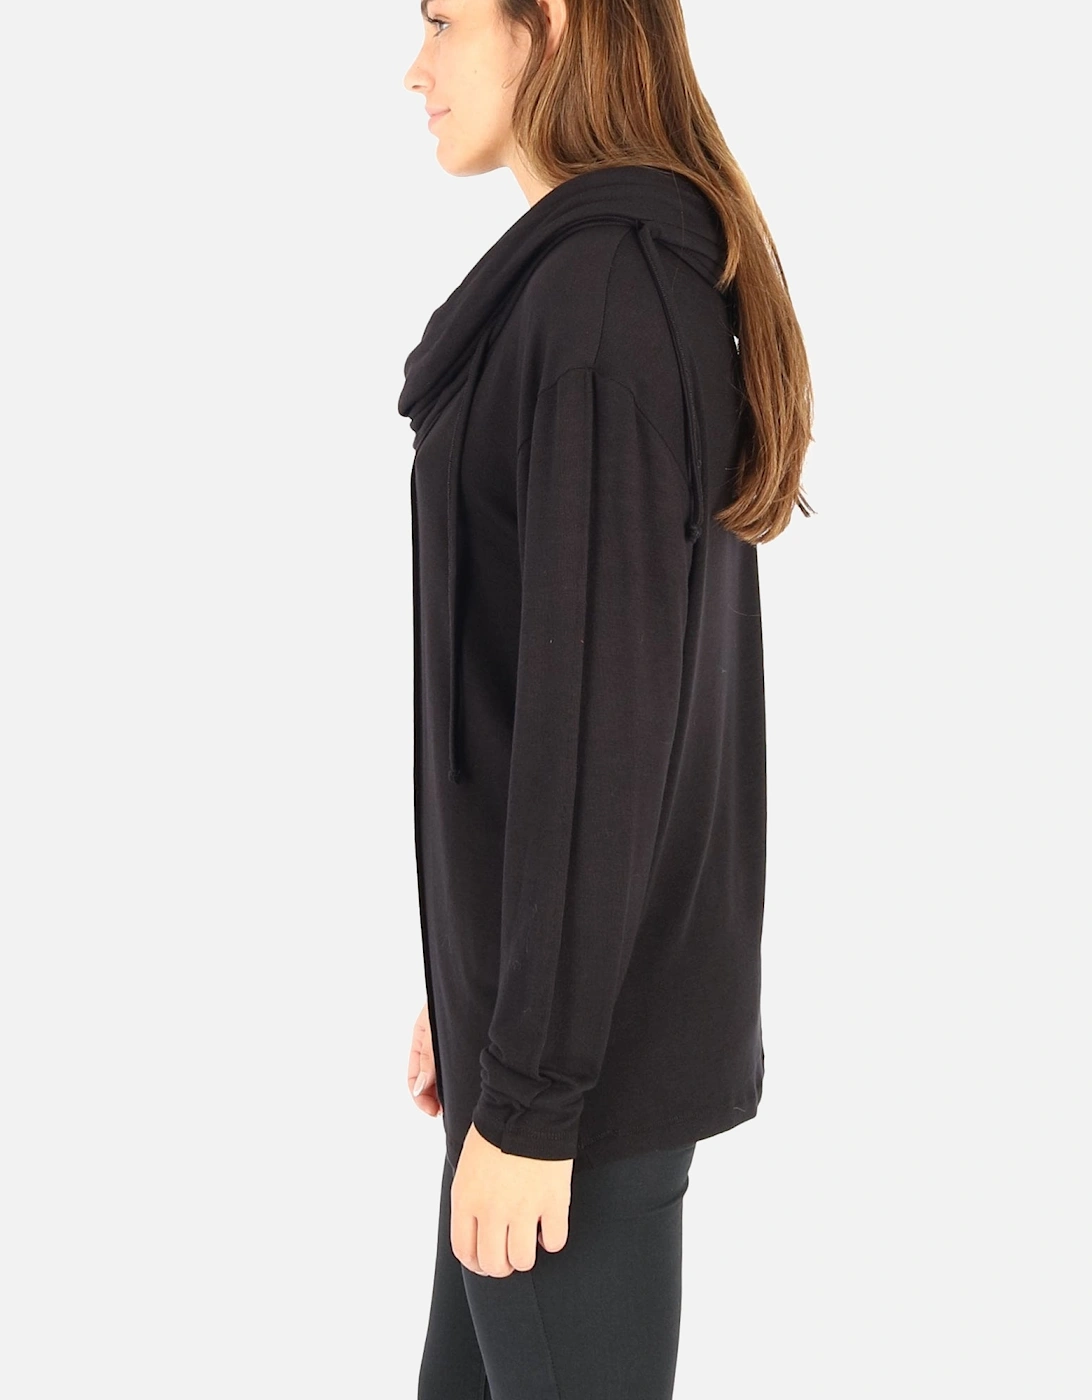 Slouch Neck LS Black Top